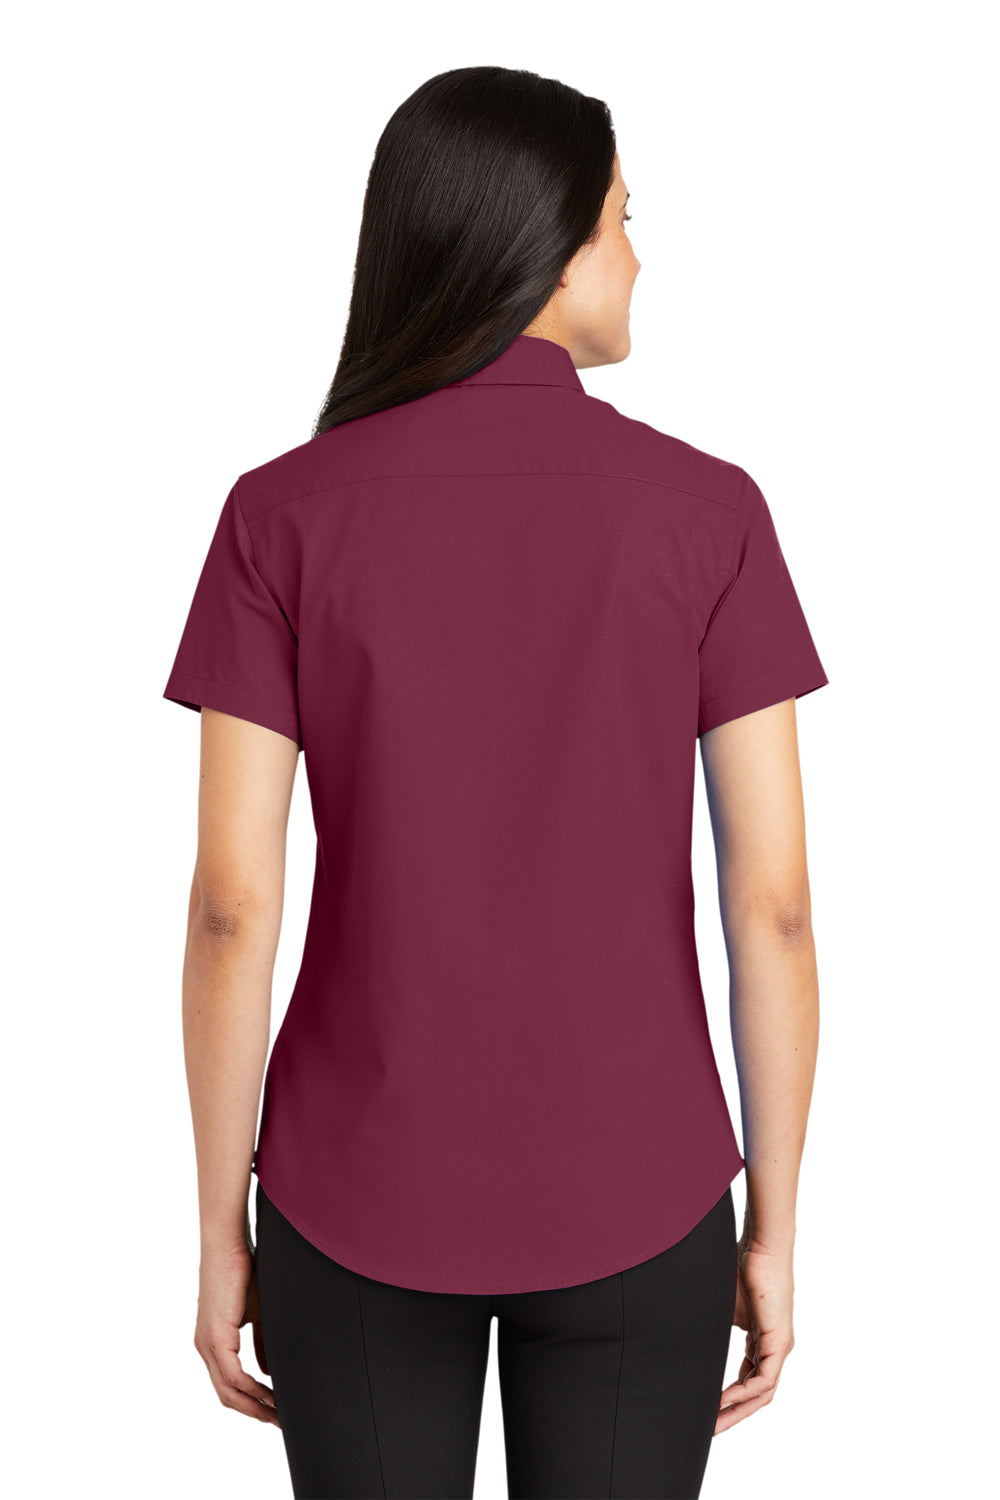 Port Authority L508 Womens Easy Care Wrinkle Resistant Short Sleeve Button Down Shirt Burgundy Back